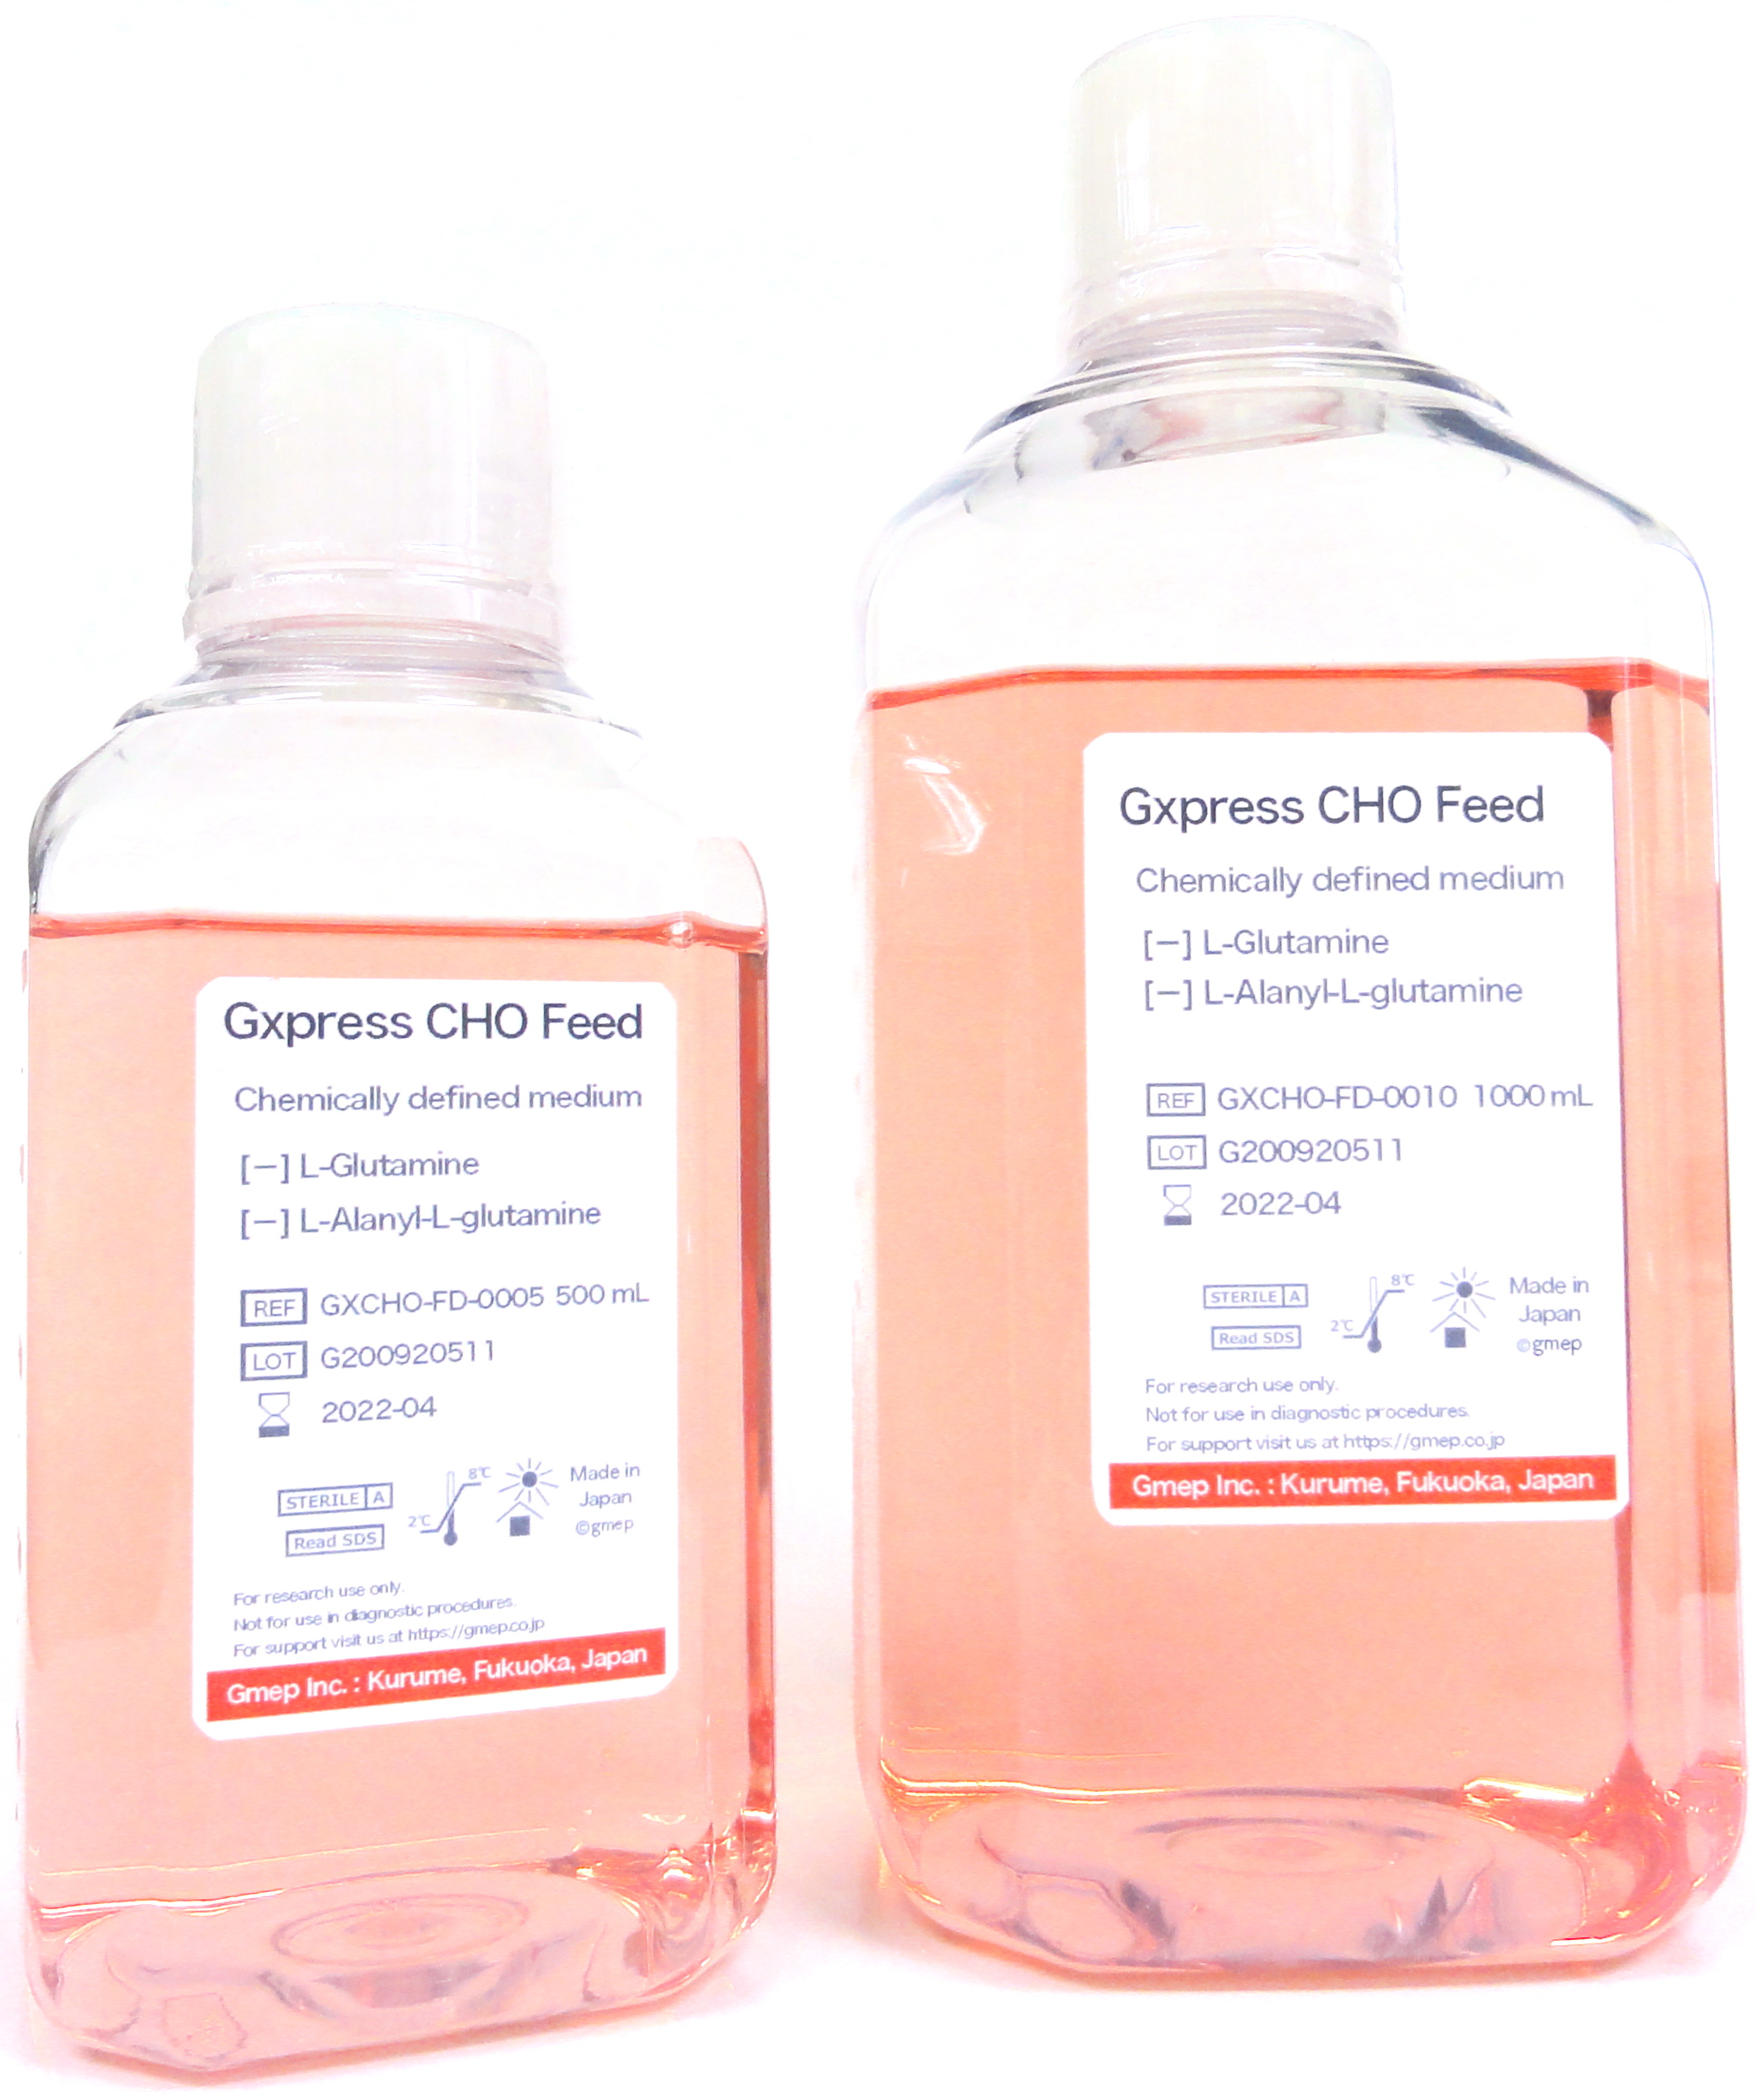 Gxpress CHO Feed medium｜CHO cells｜Fed-Batch Culture｜Chemically Defined Incorporated